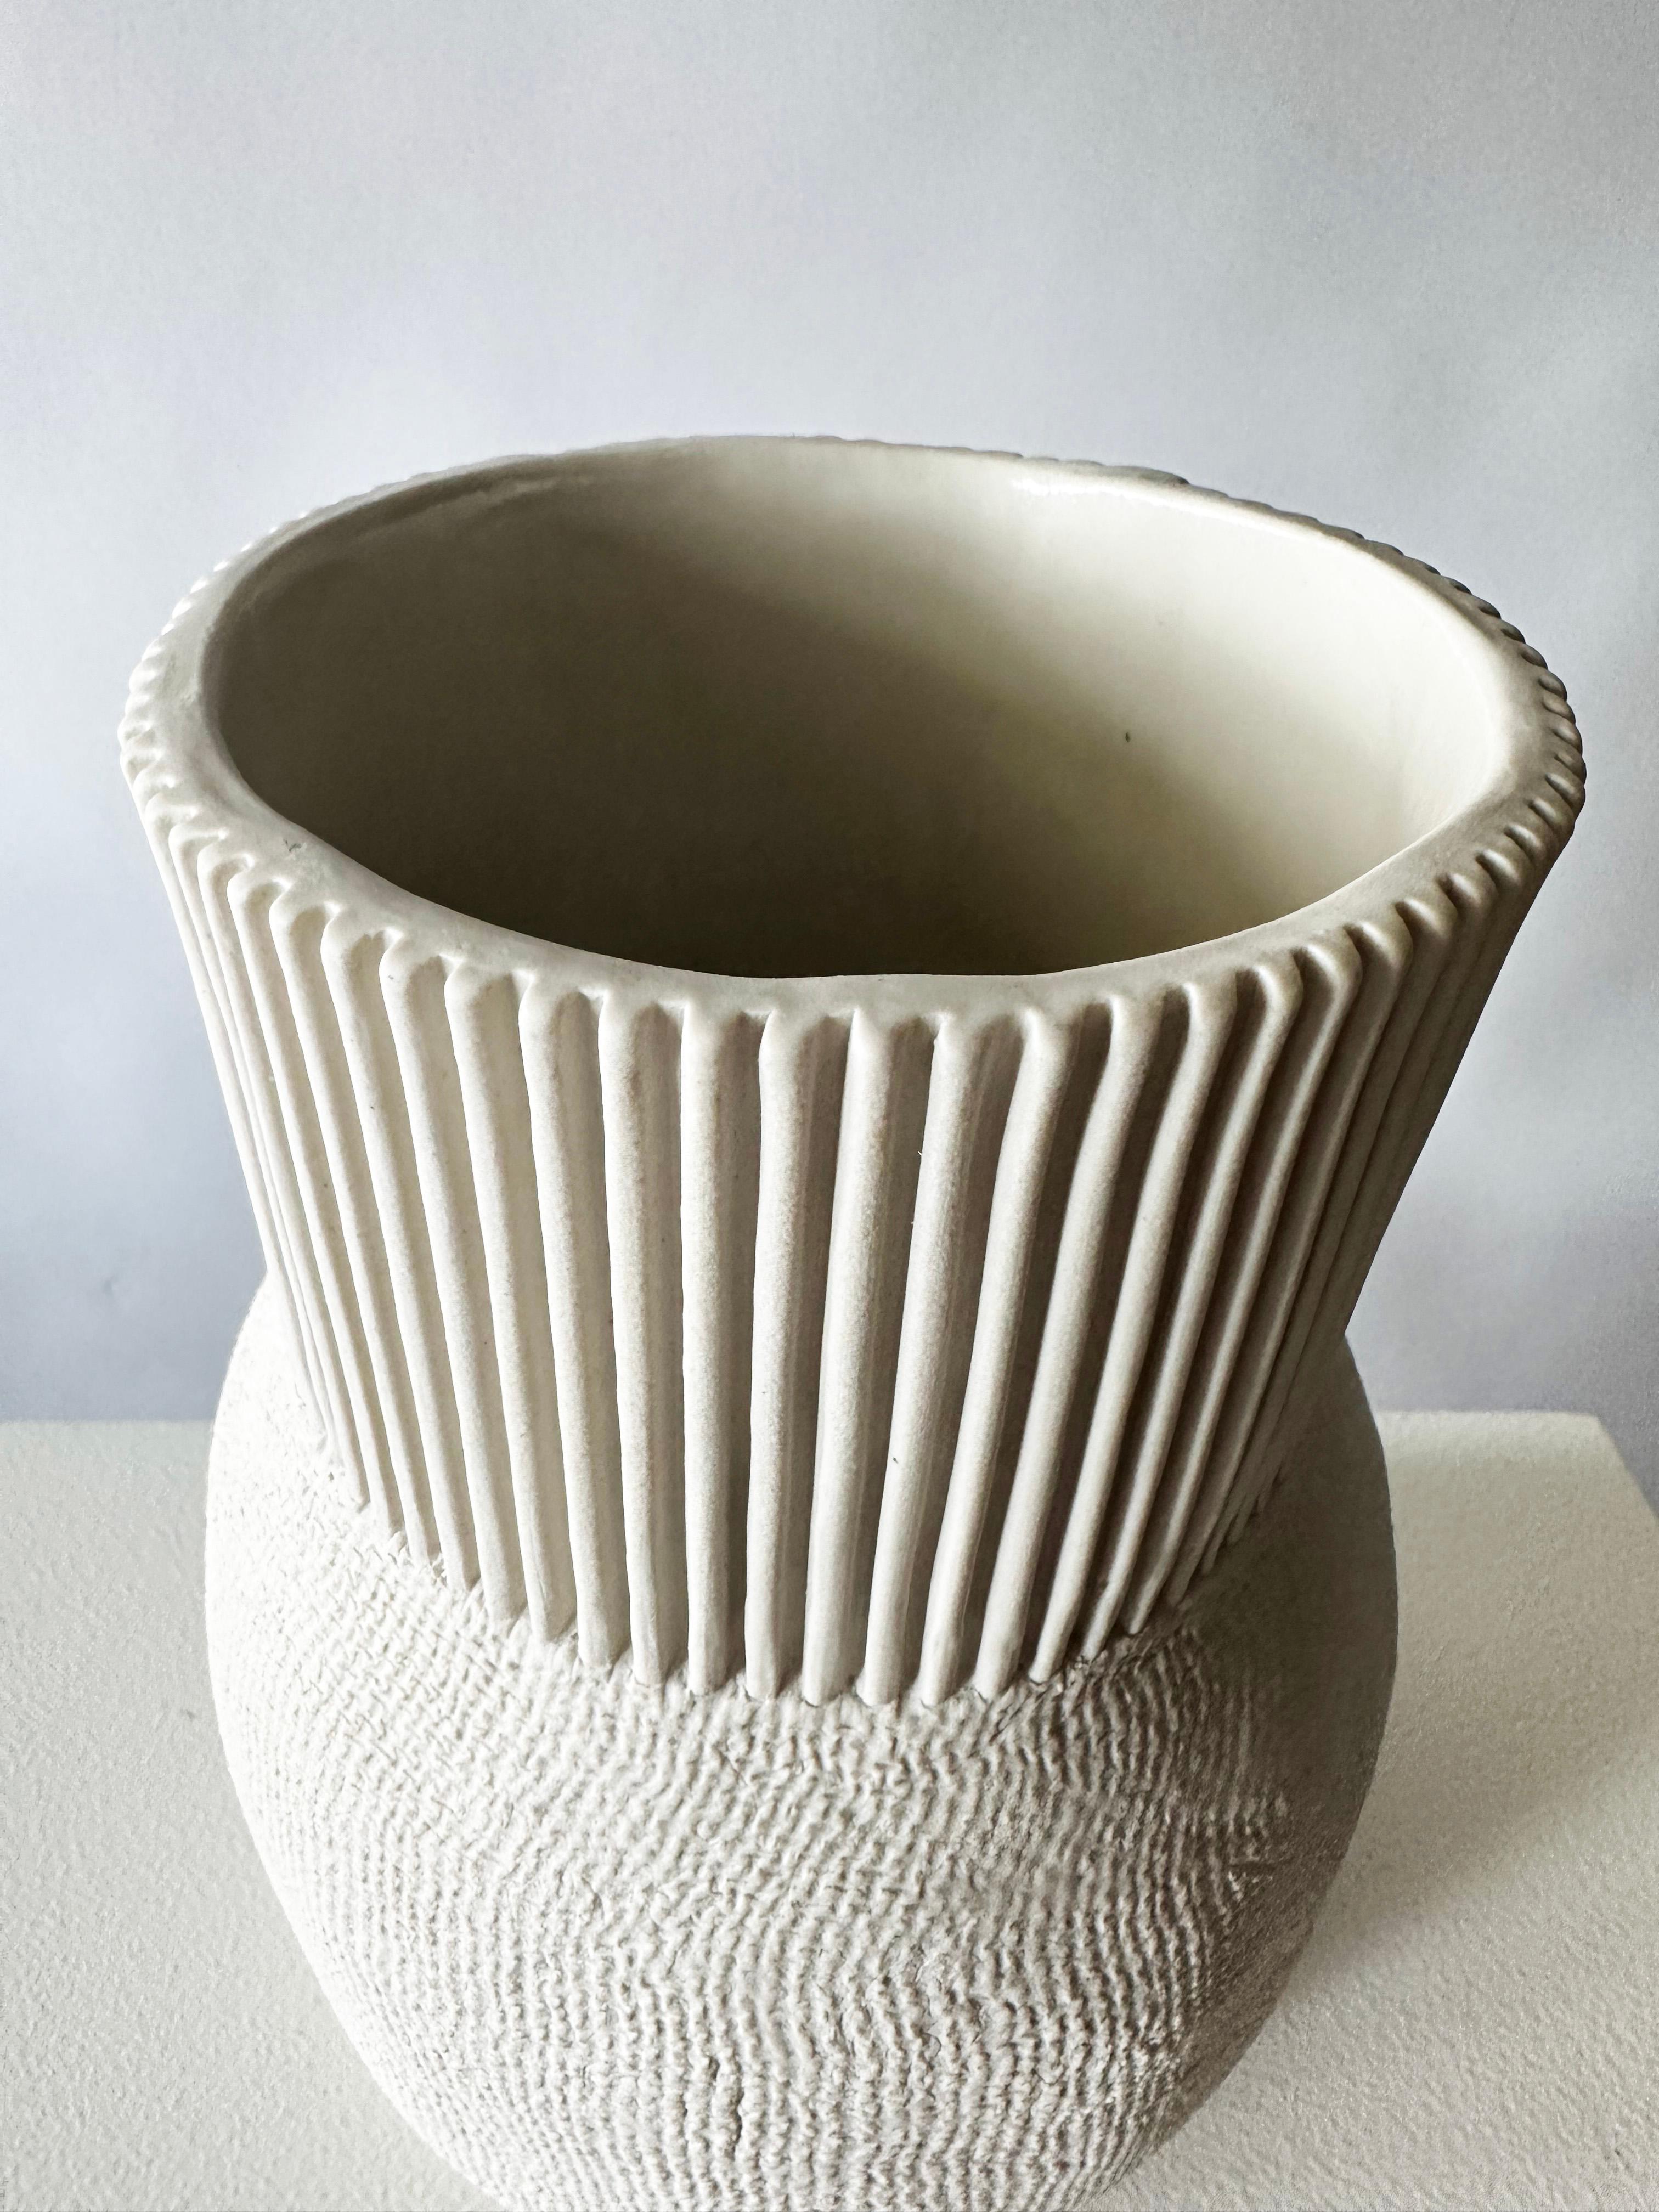 American White Burlap Textured Ceramic Vase by Cym Warkov For Sale